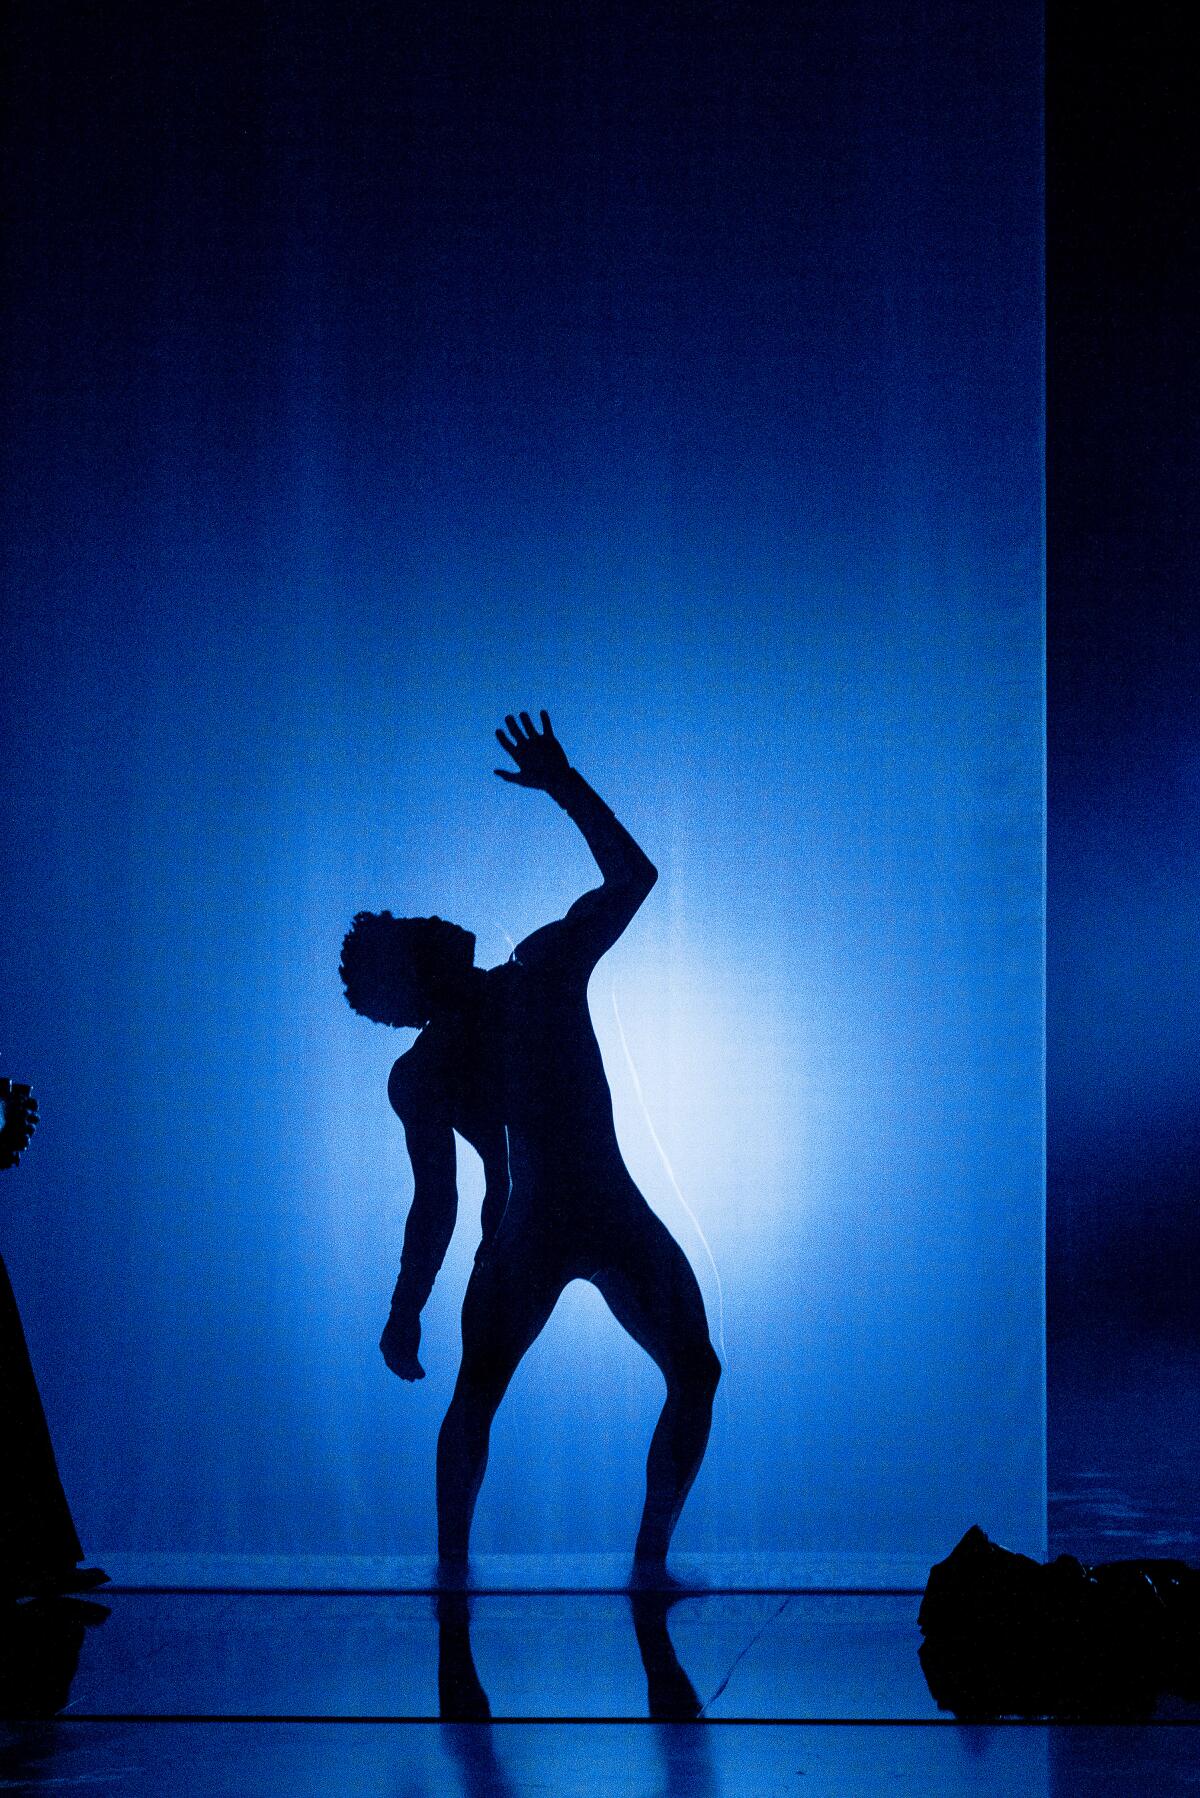 A man reaching up, creating a shadow with blue light around him